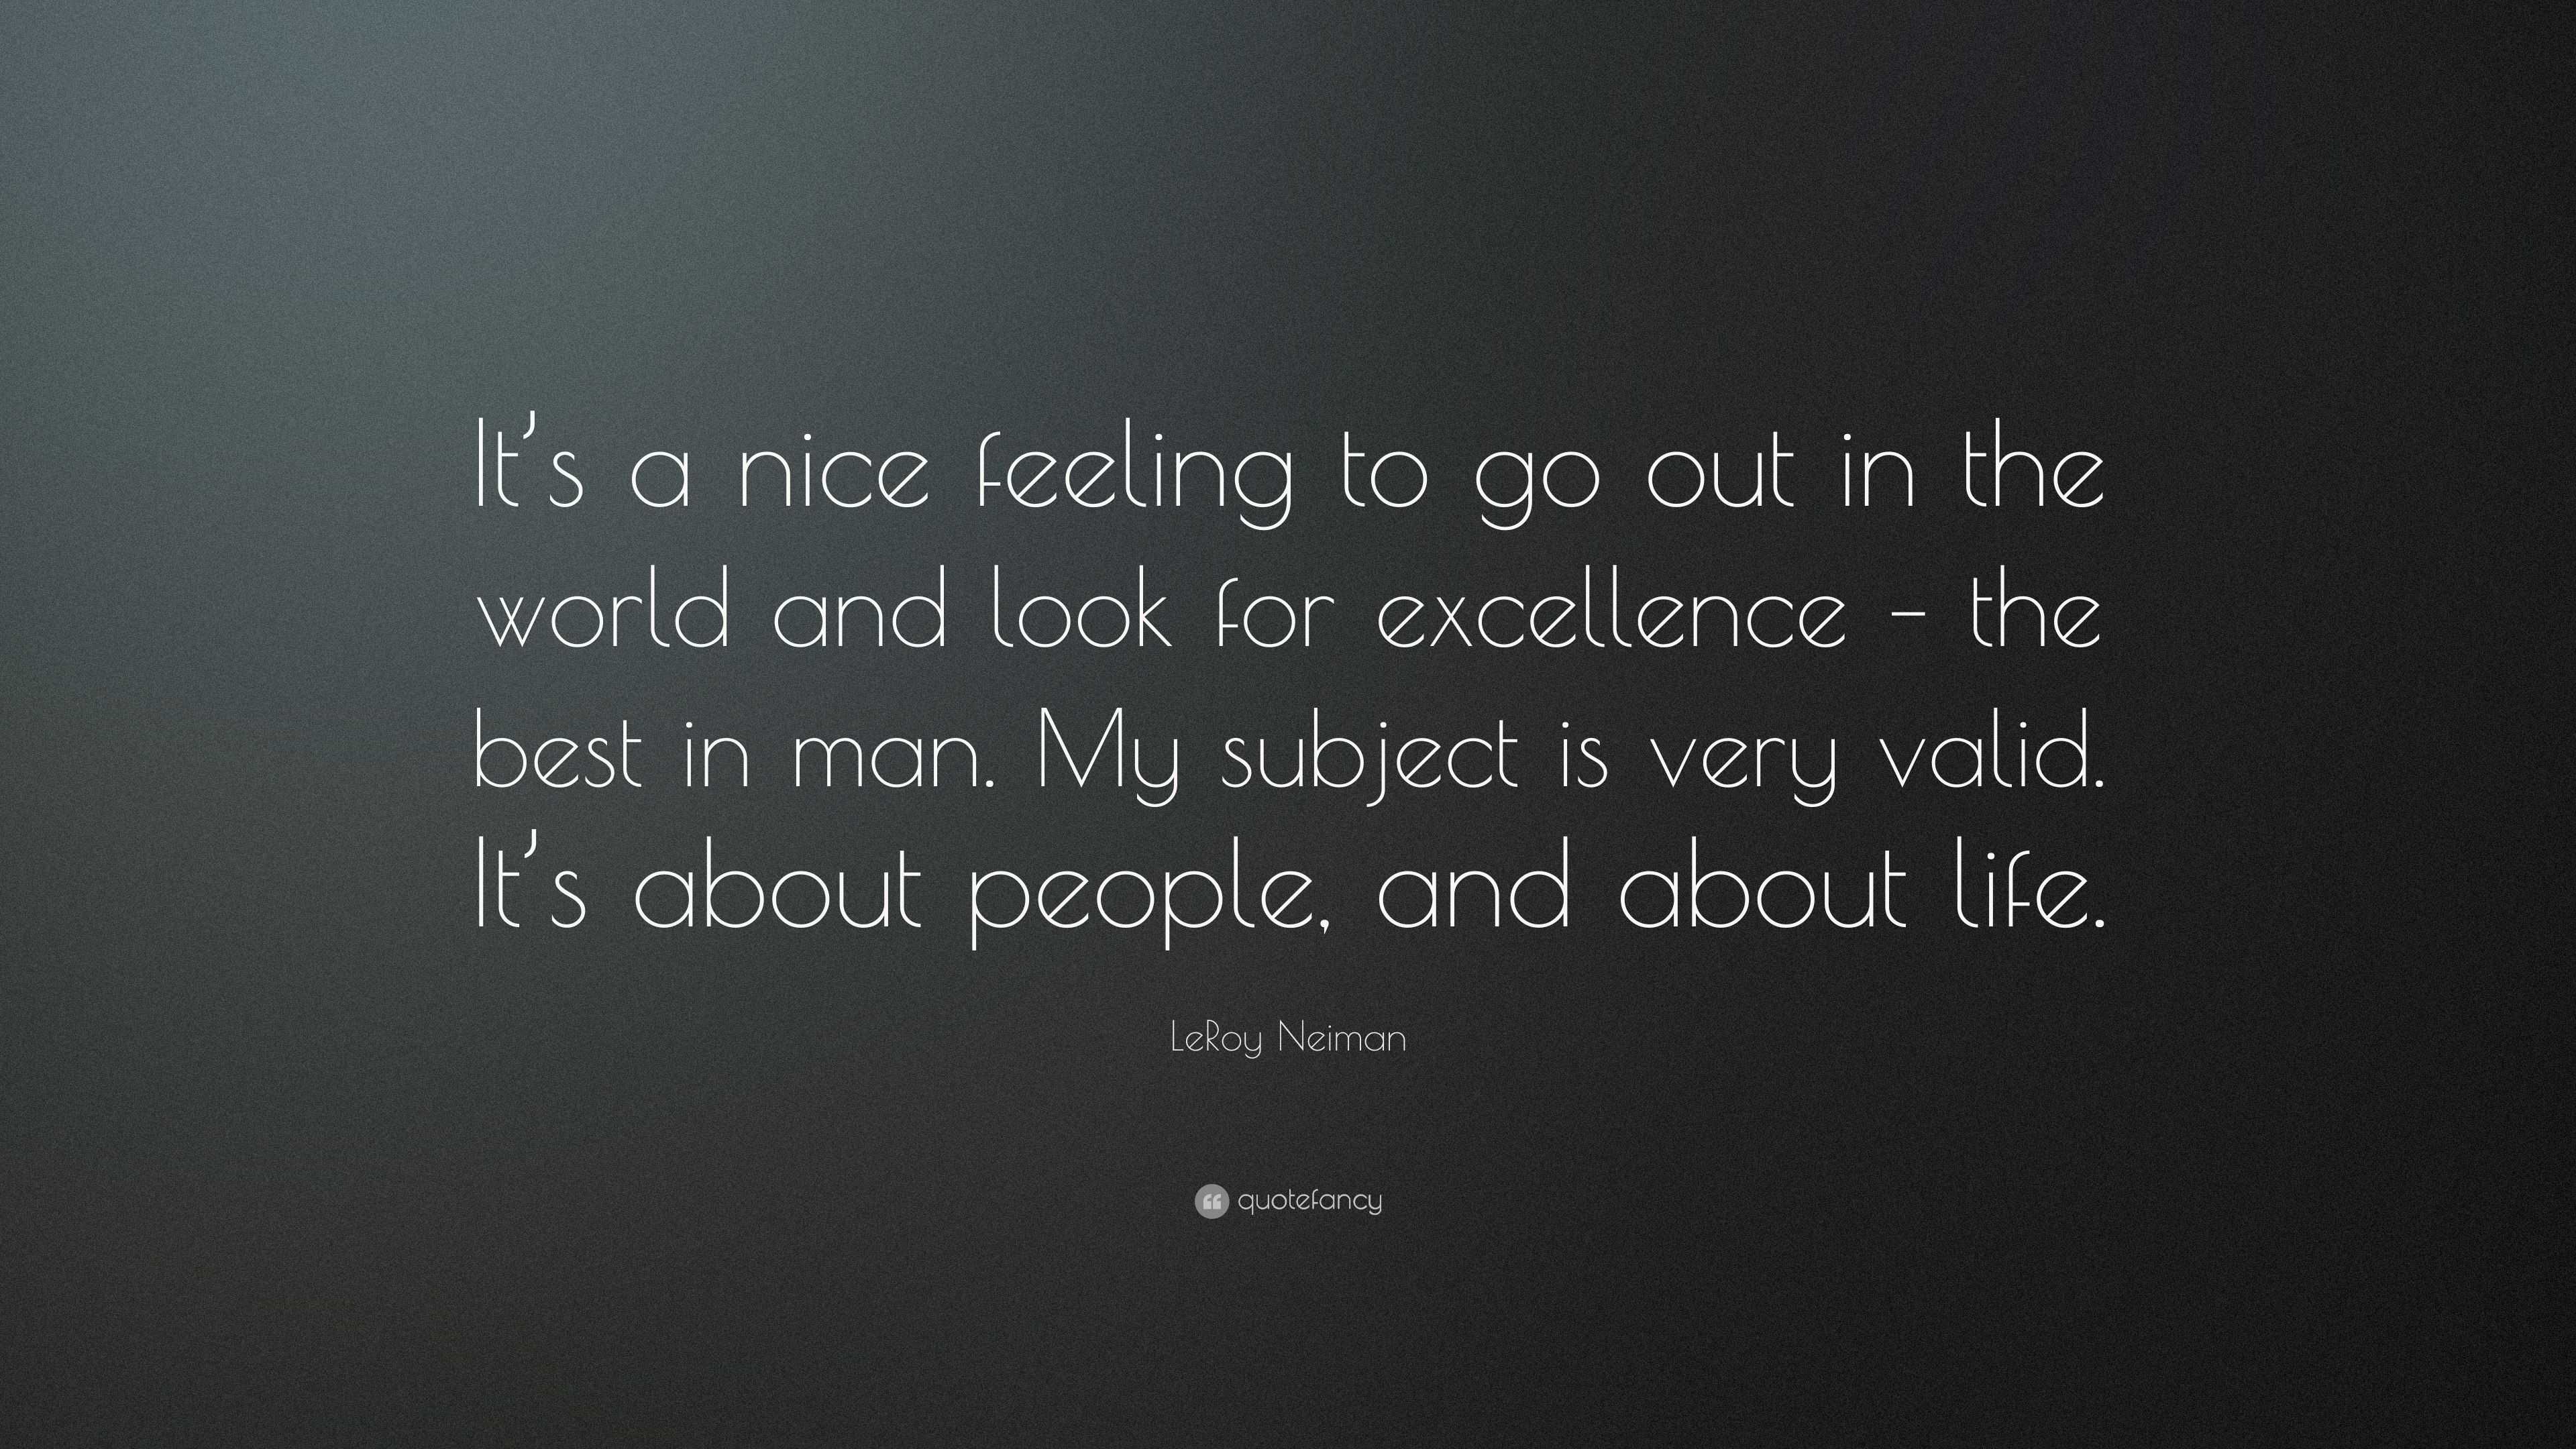 LeRoy Neiman Quote: “It’s a nice feeling to go out in the world and ...